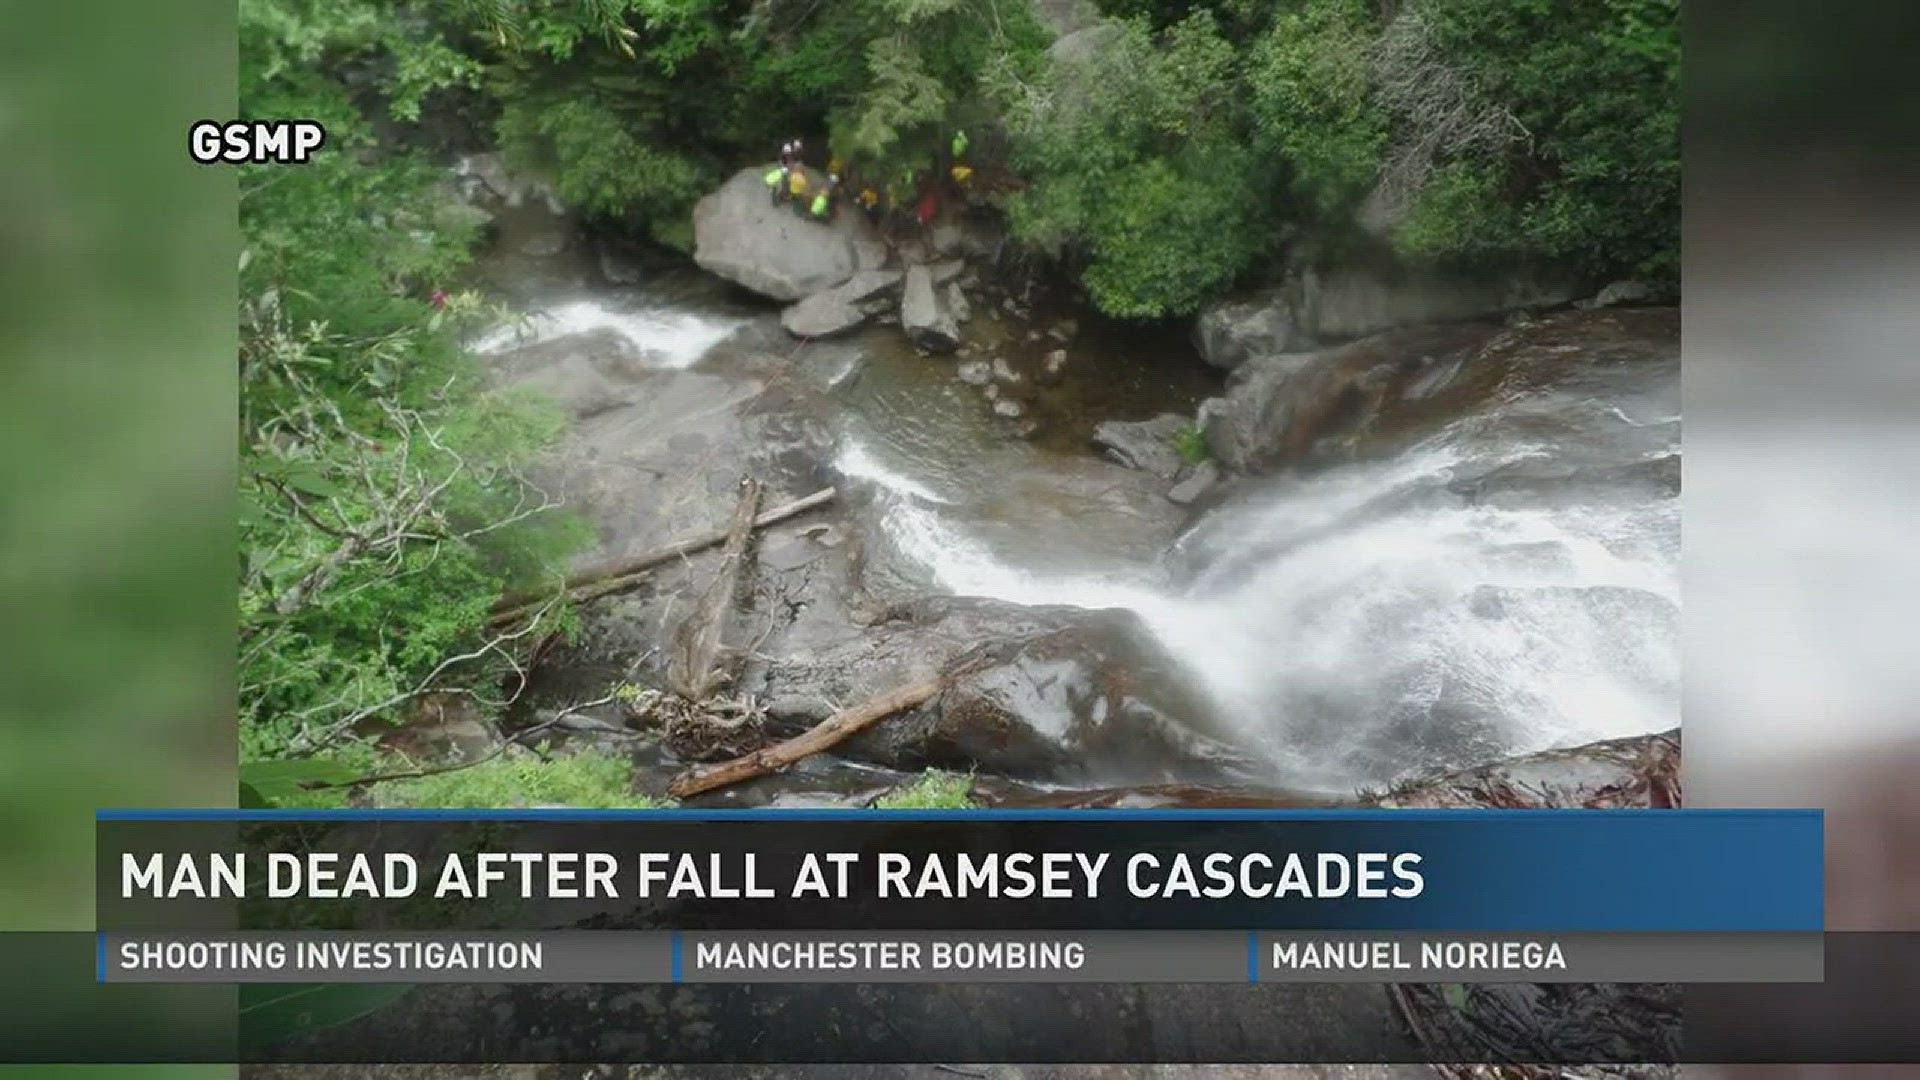 May 30, 2017: Smokies park officials say a man is dead after falling from the top of Ramsey Cascades.